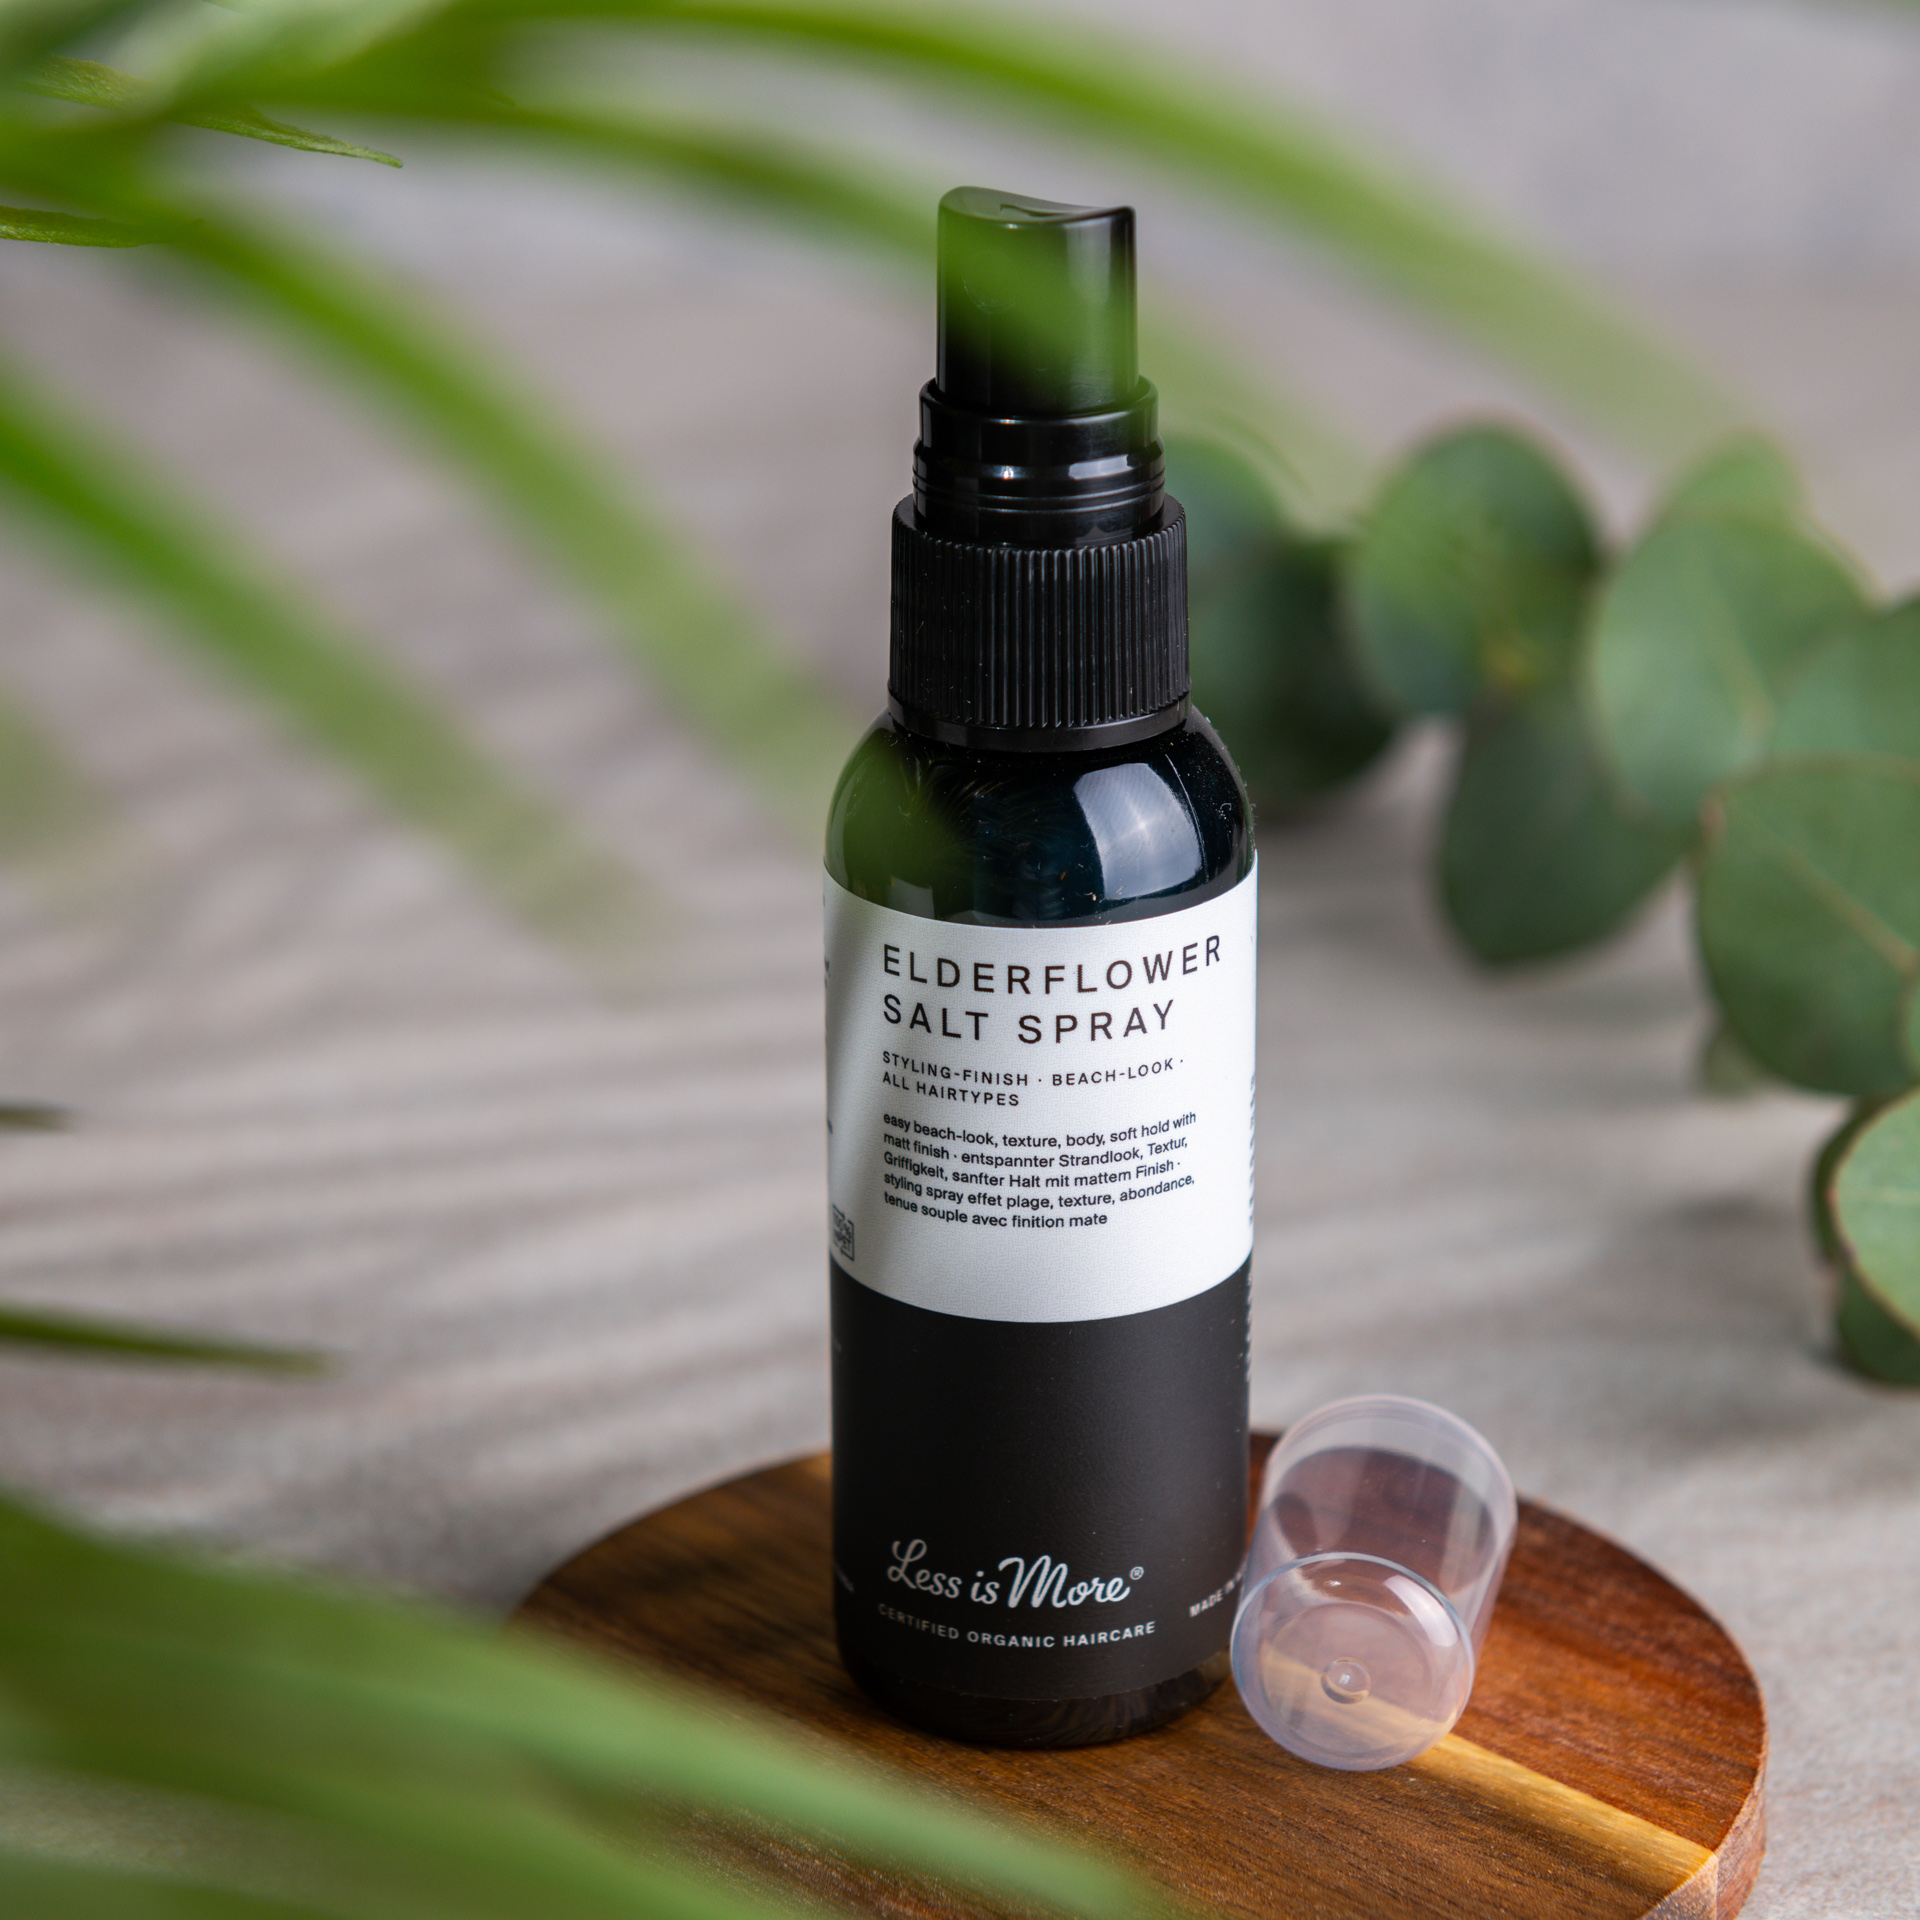 ELDERFLOWER SALT SPRAY + ELDERFLOWER SALT SPRAY TRAVEL SIZE